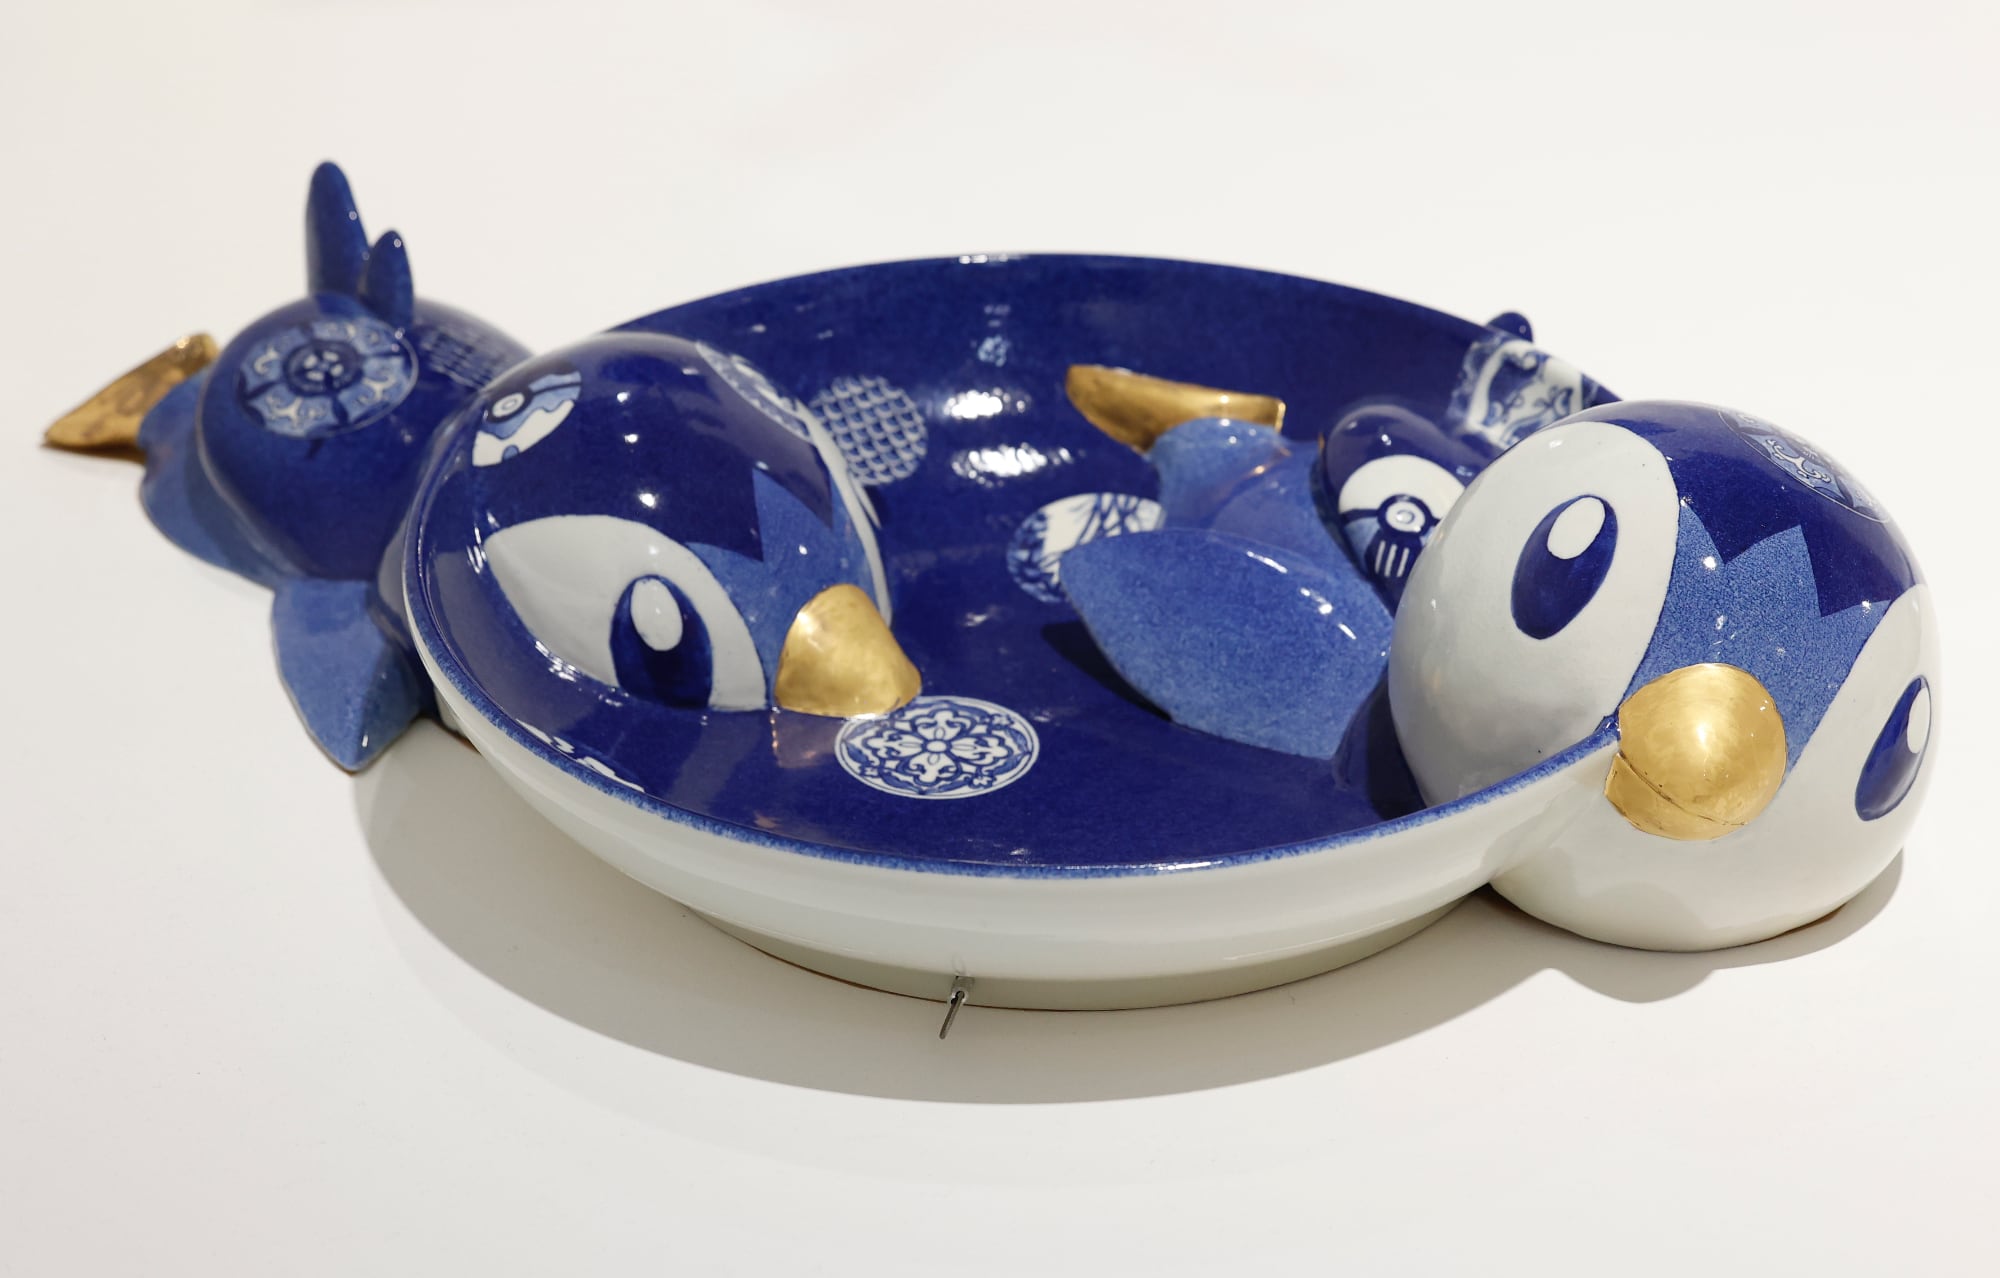 a ceramic plate in blue and white with bird characters emerging from the sides